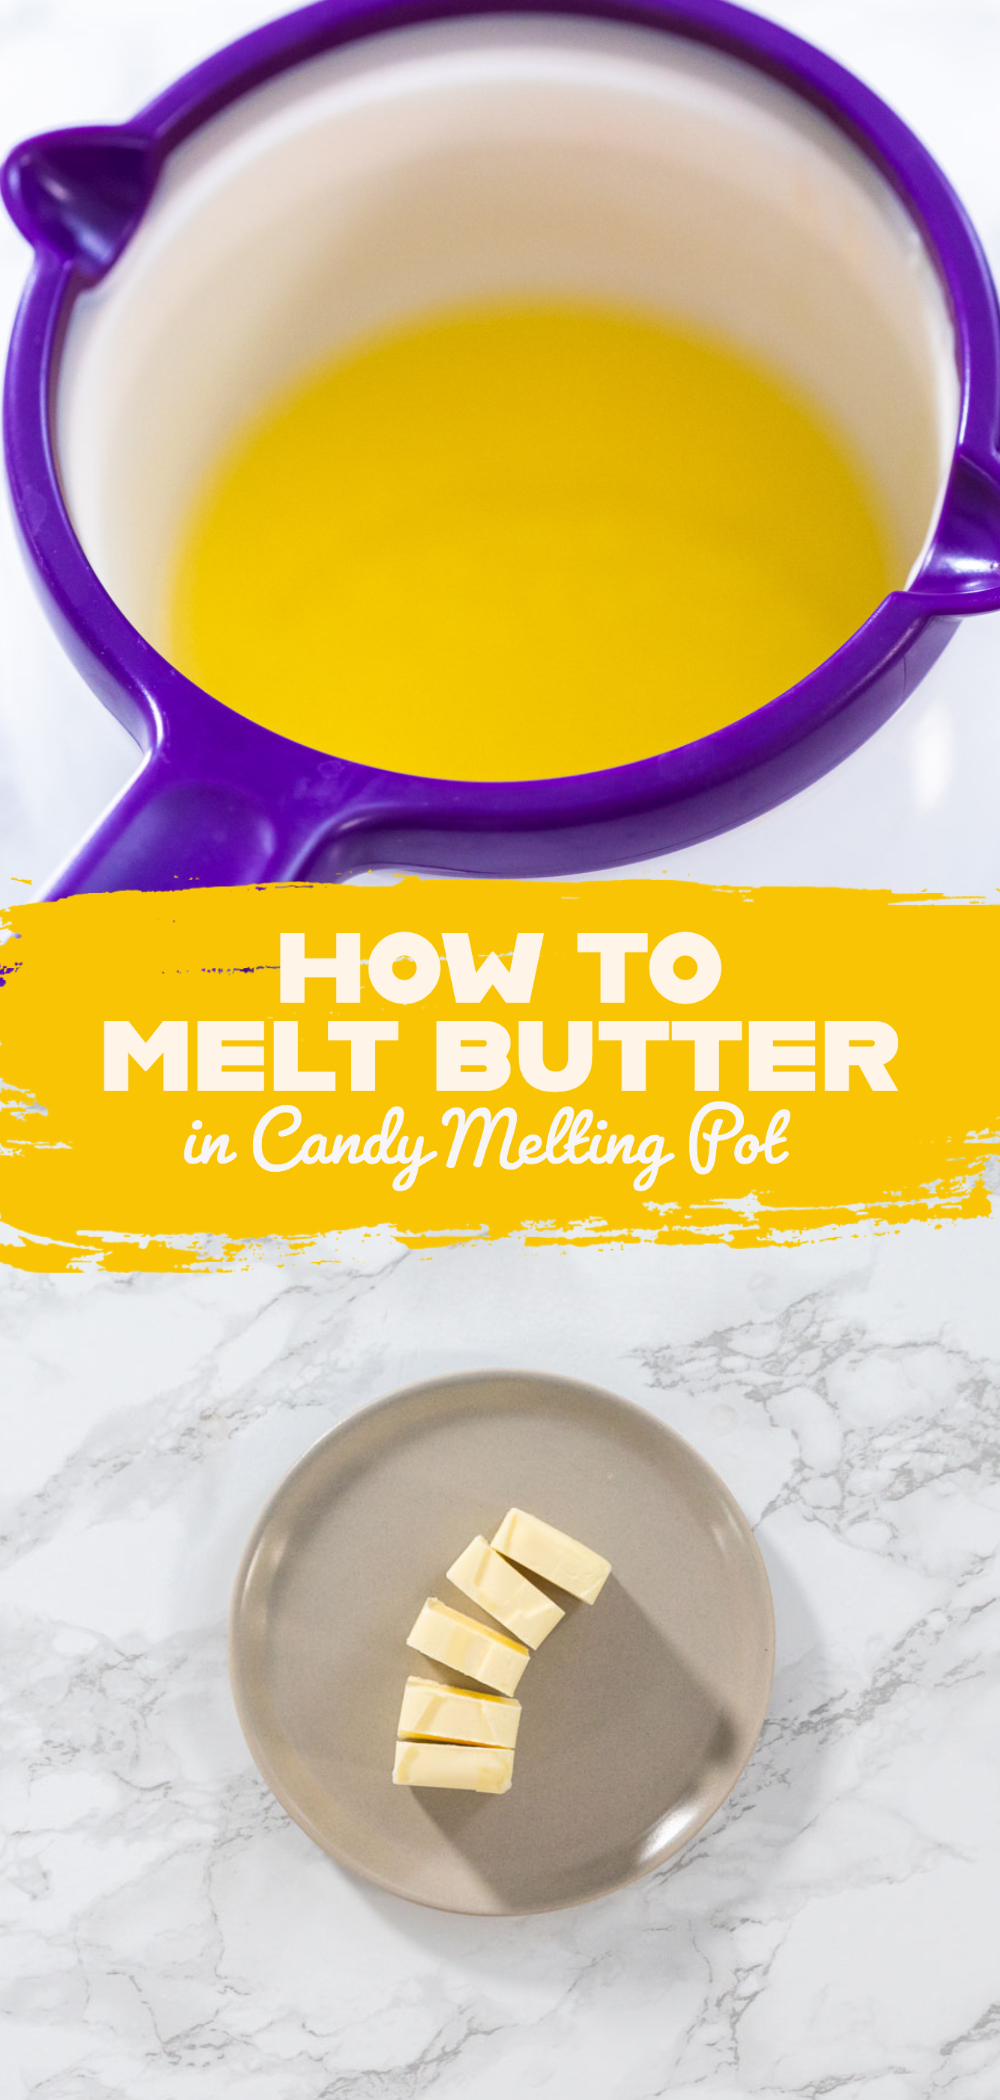 How to Melt Butter in Candy Melting Pot